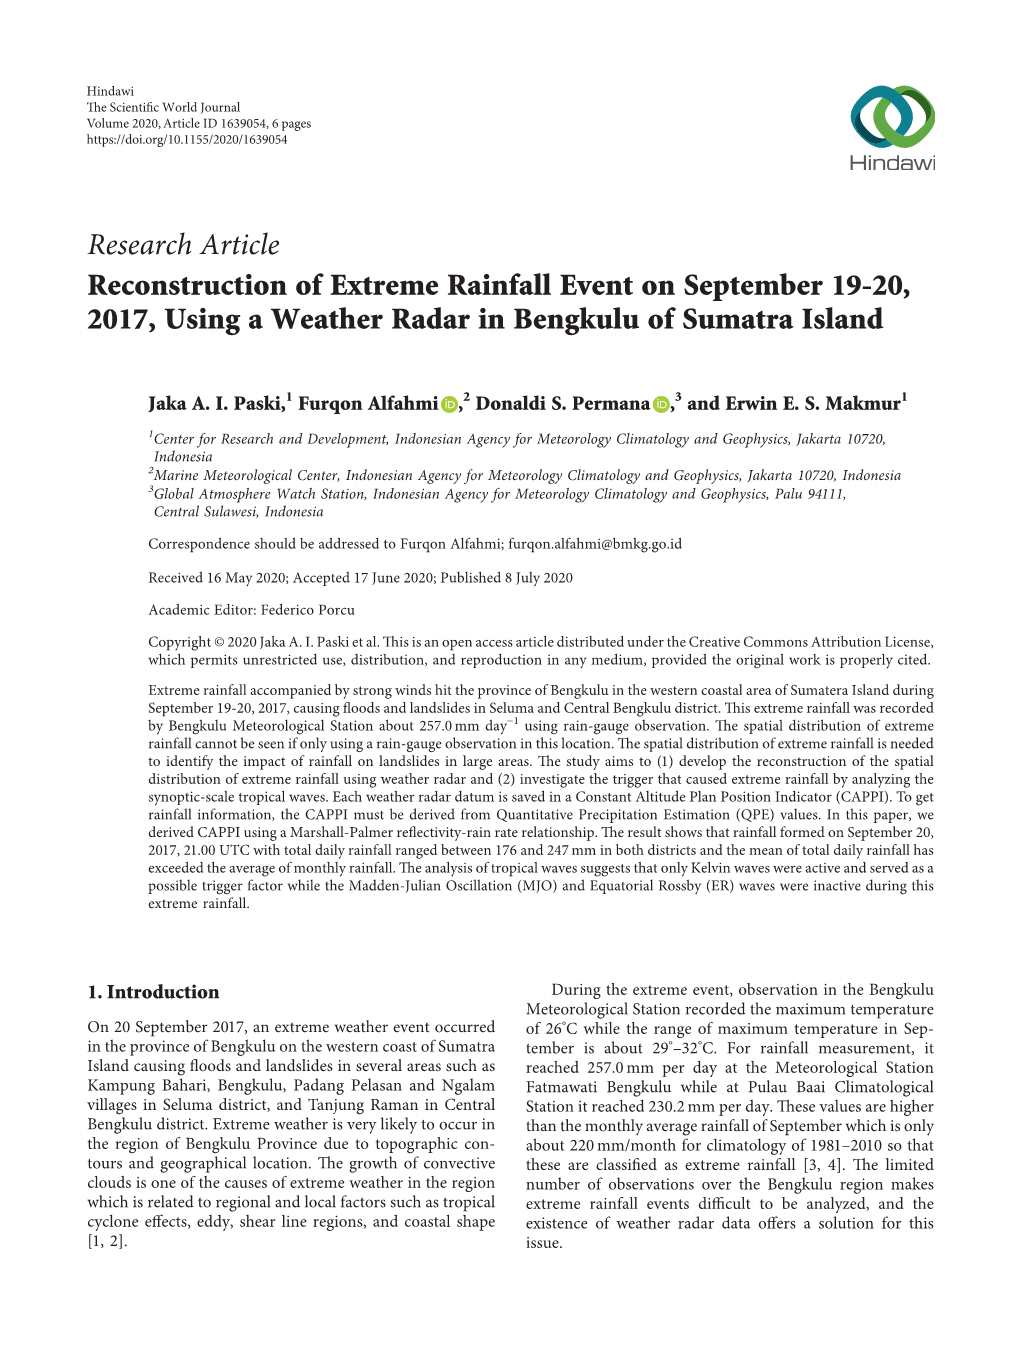 Reconstruction of Extreme Rainfall Event on September 19-20, 2017, Using a Weather Radar in Bengkulu of Sumatra Island